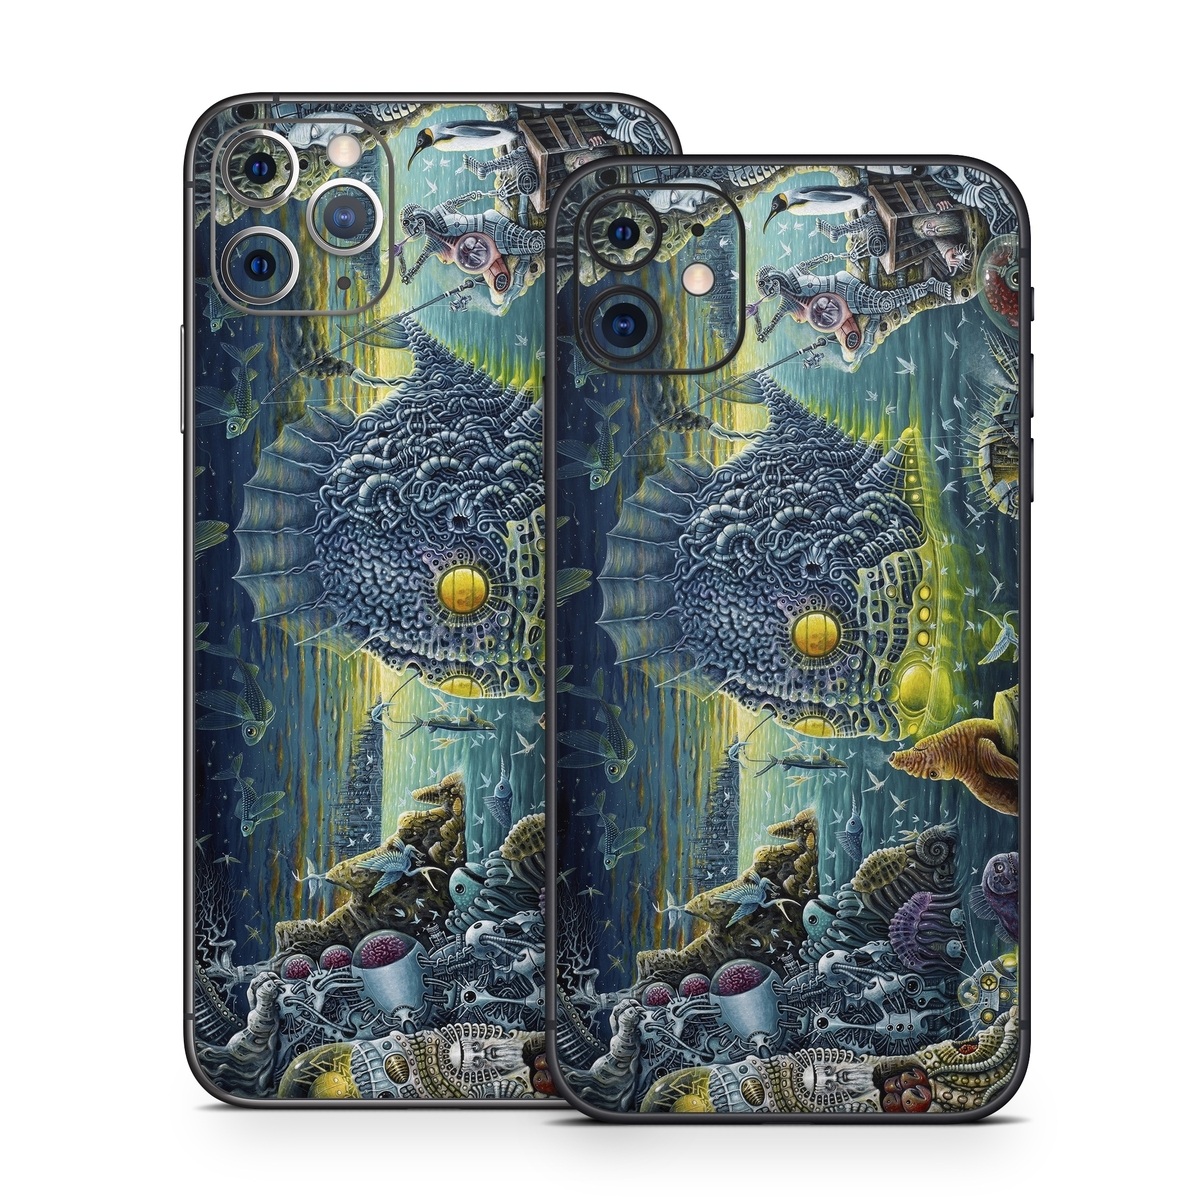 iPhone 11 Series Skin design of Organism, Water, Illustration, Art, Painting, Cg artwork, Fiction, Fictional character, Marine biology, Mythology, with black, gray, blue, green colors